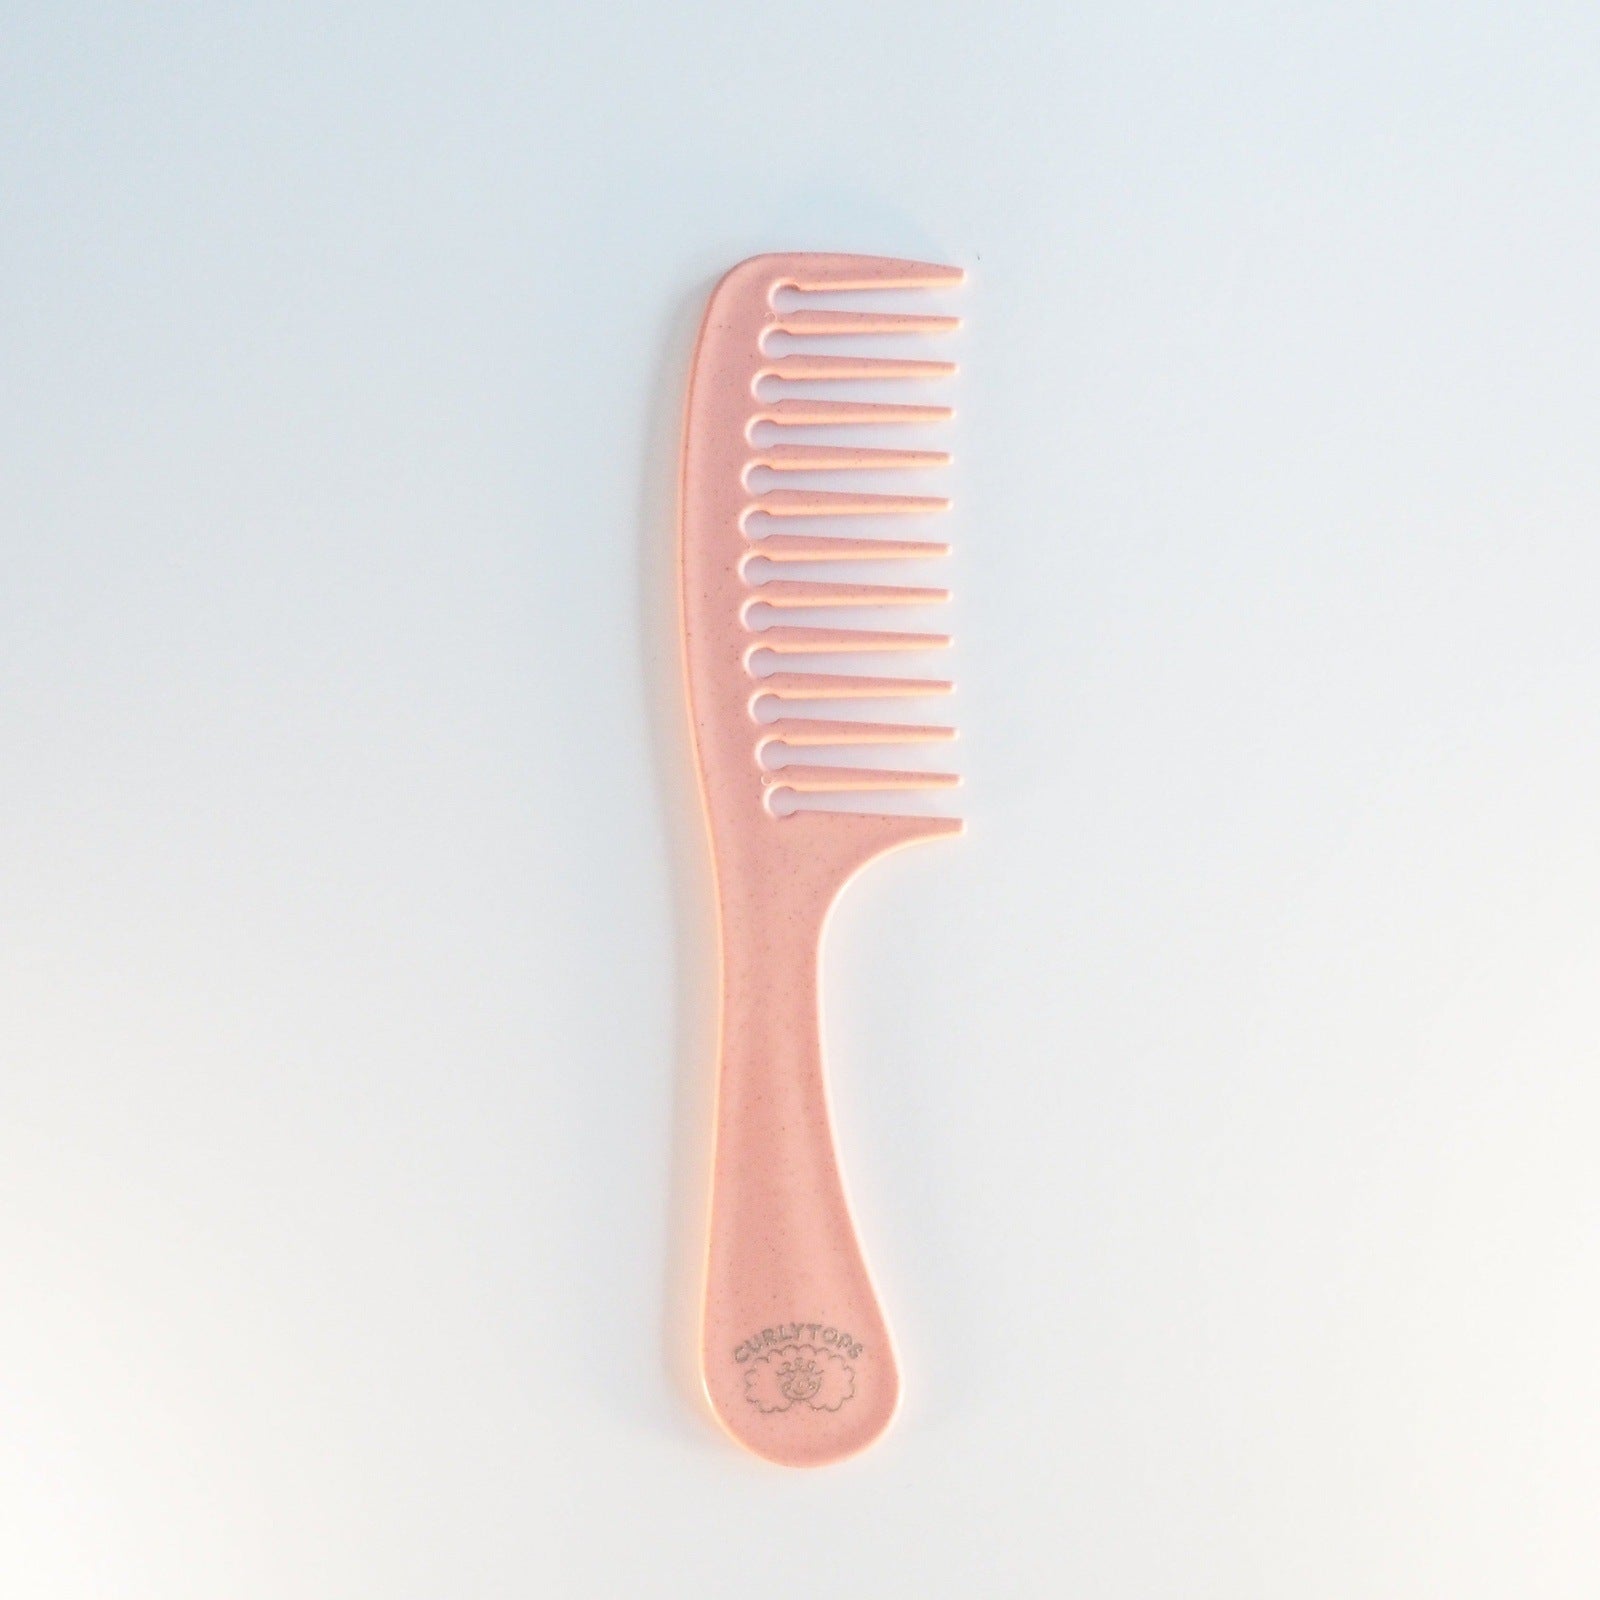 The Curlytops Biodegrable Wheat Straw comb for styling curly hair